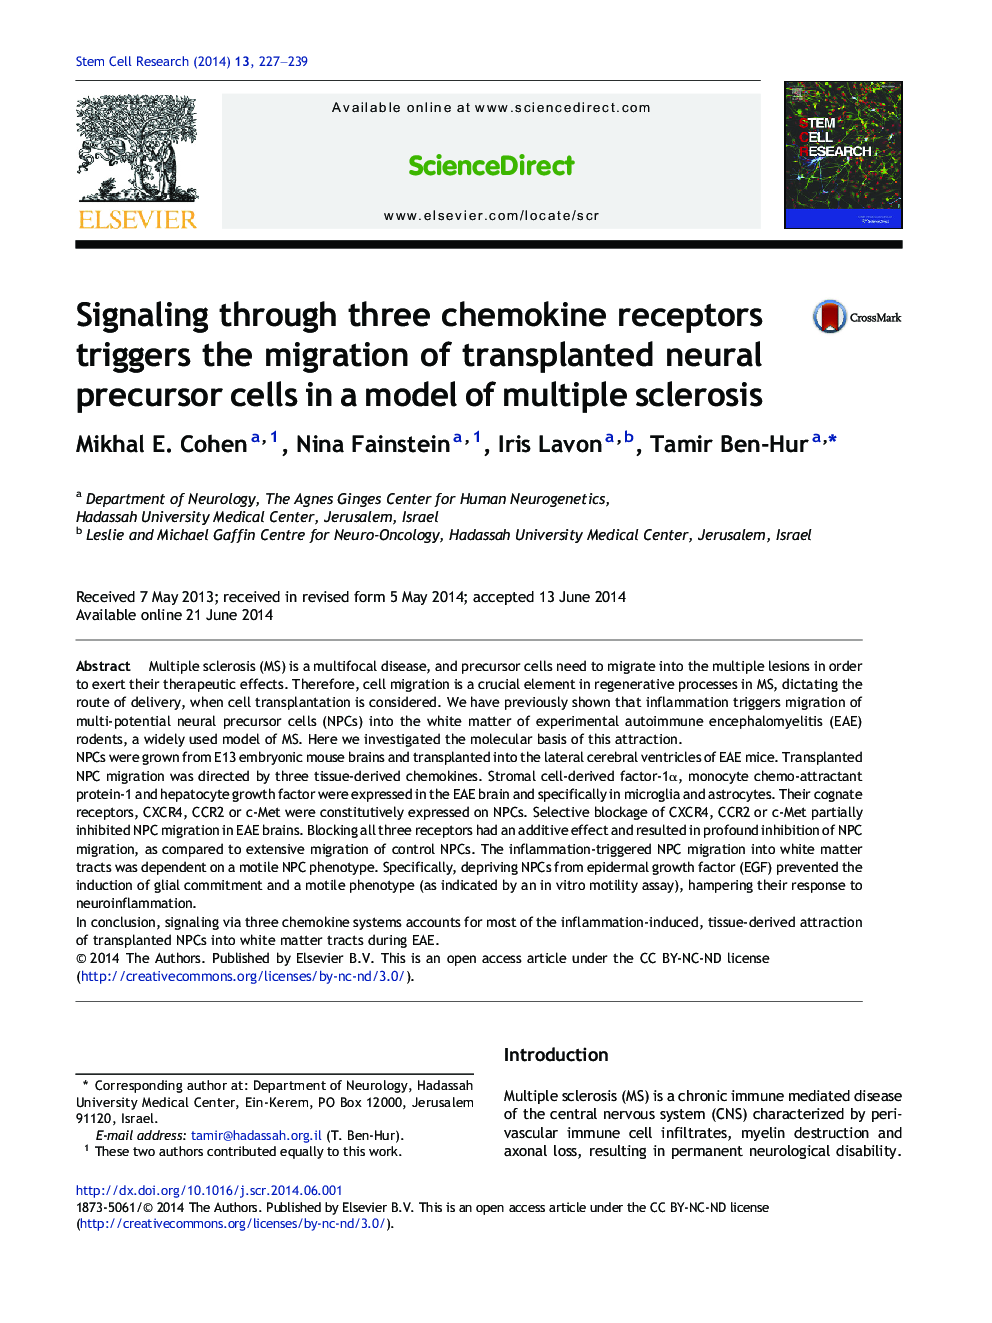 Signaling through three chemokine receptors triggers the migration of transplanted neural precursor cells in a model of multiple sclerosis